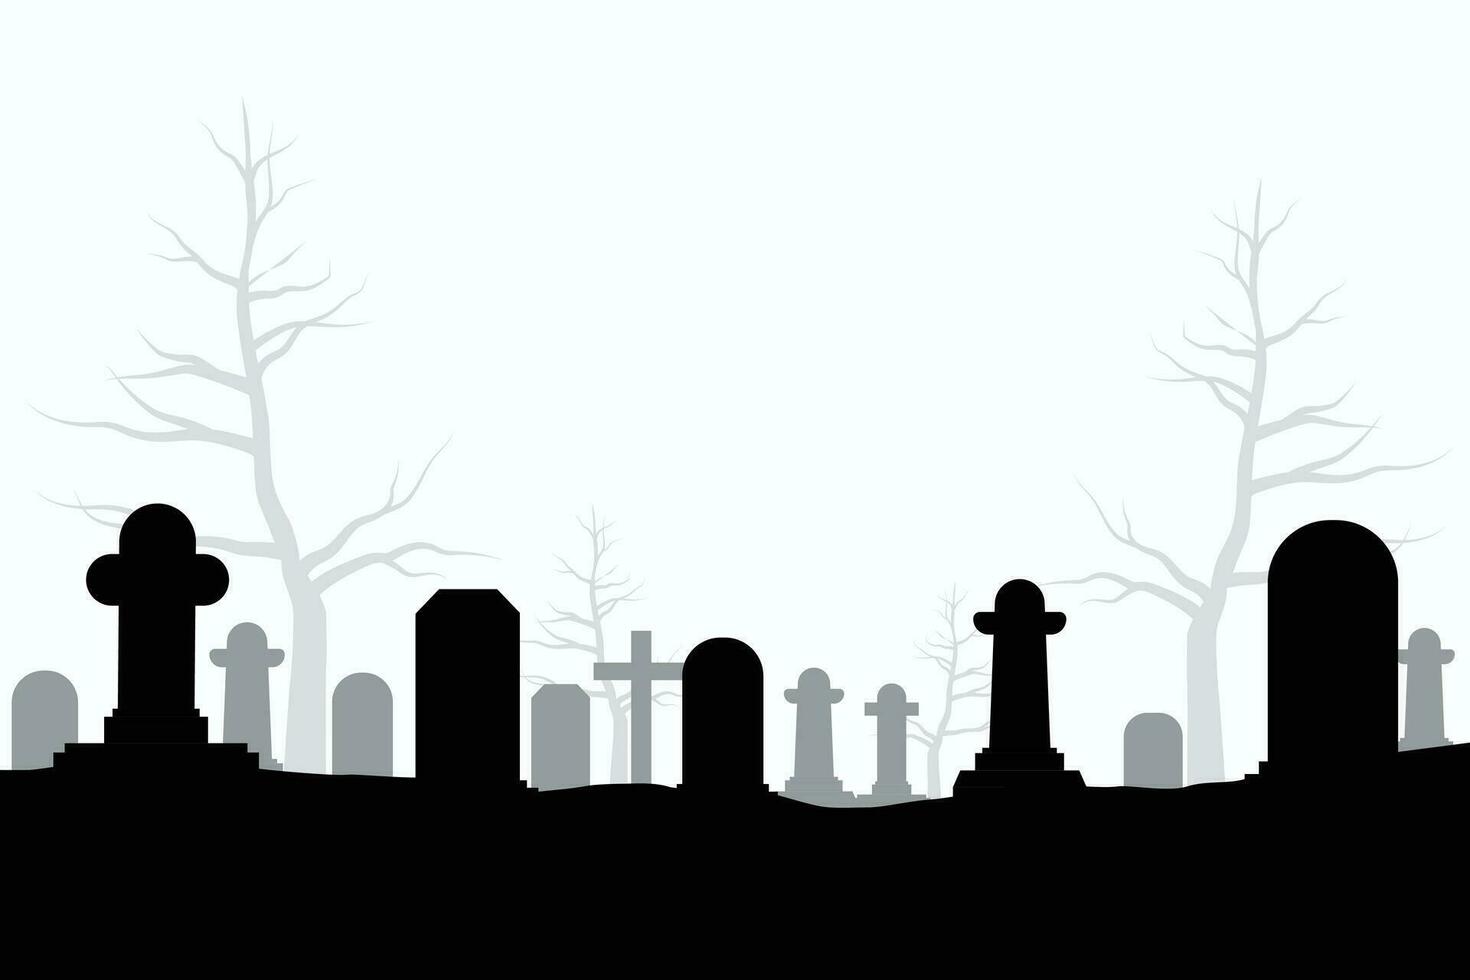 Halloween silhouette background with trees, tombstones, Cemetery in forest. vector